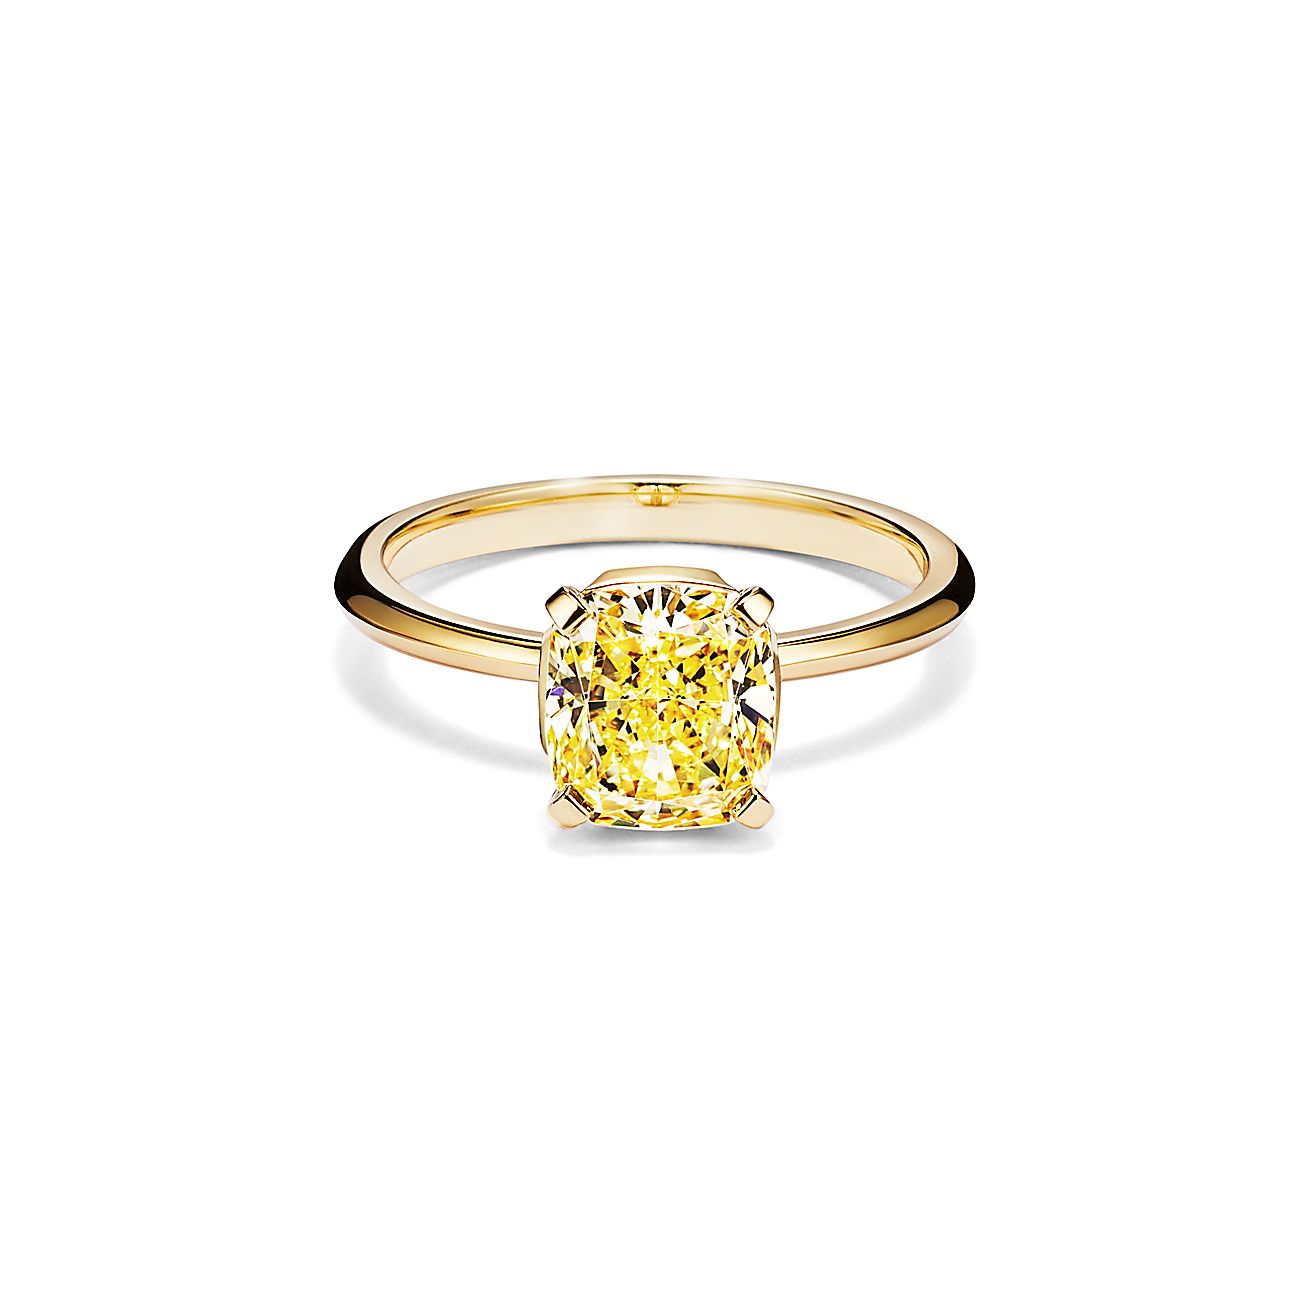 Tiffany True® Engagement Ring with a Cushion-cut Yellow